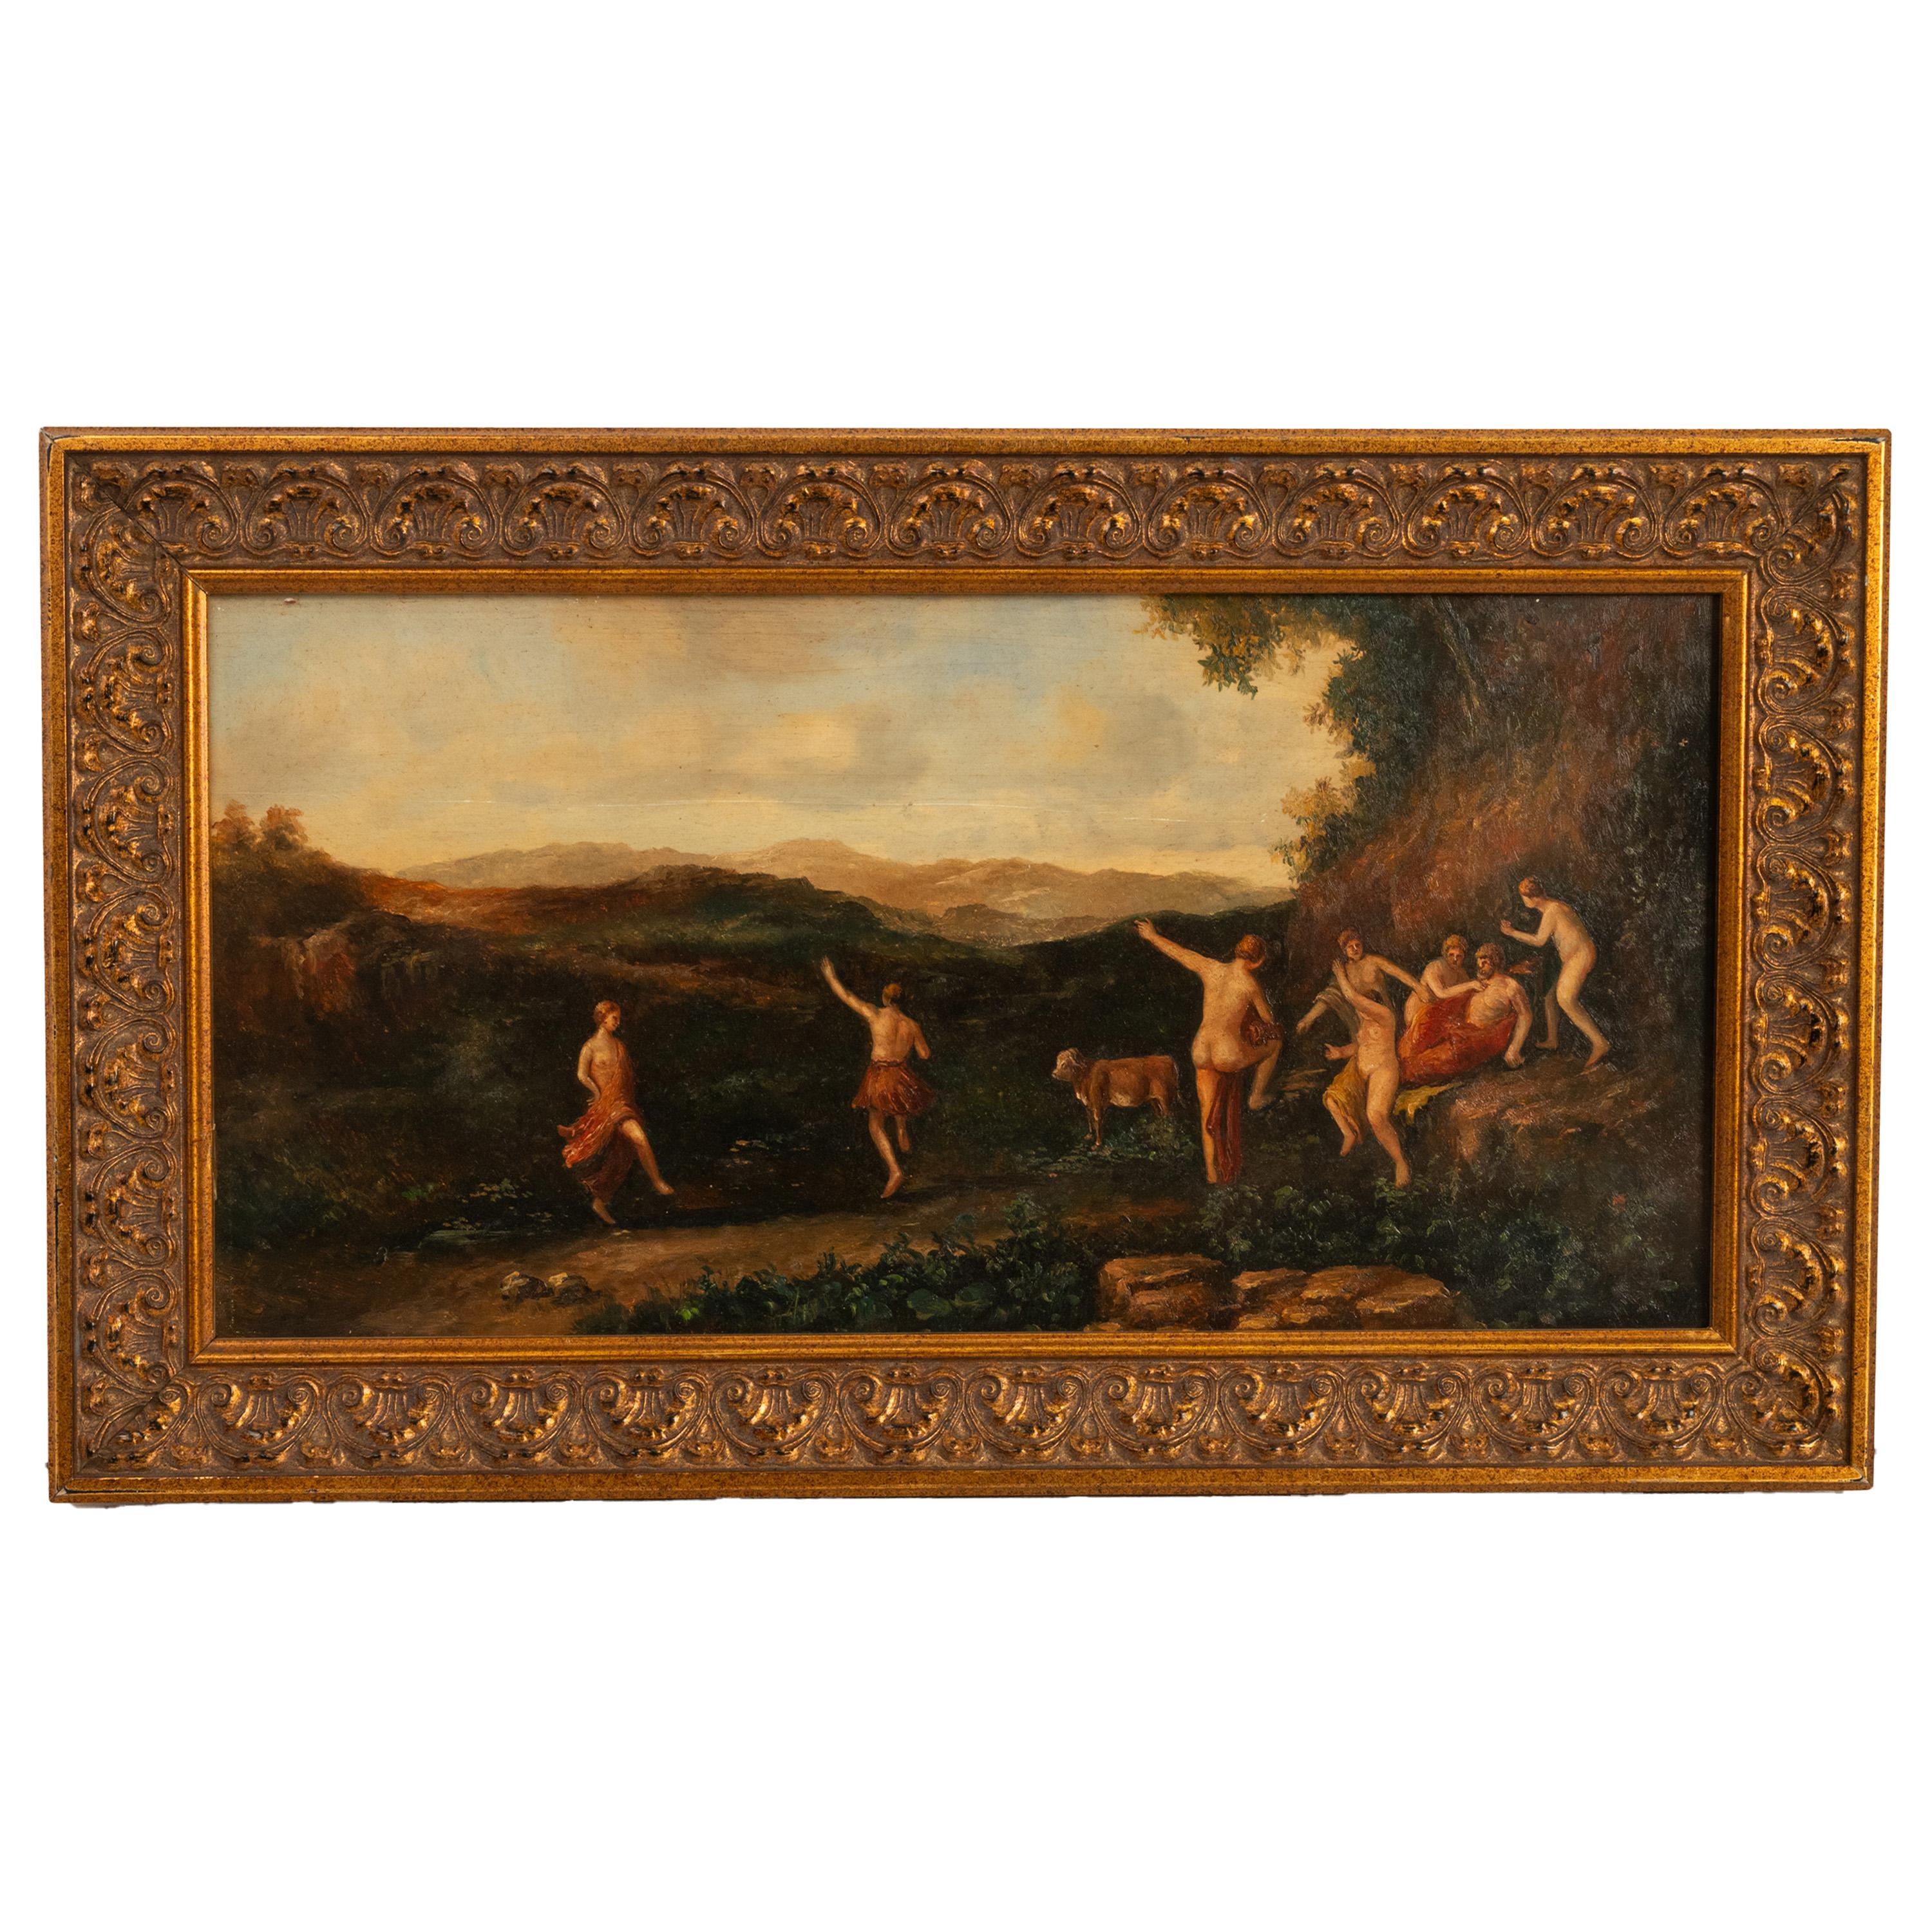 Antique 19th Century Neoclassical Bacchanal Painting Dancing of the Nymphs 1850